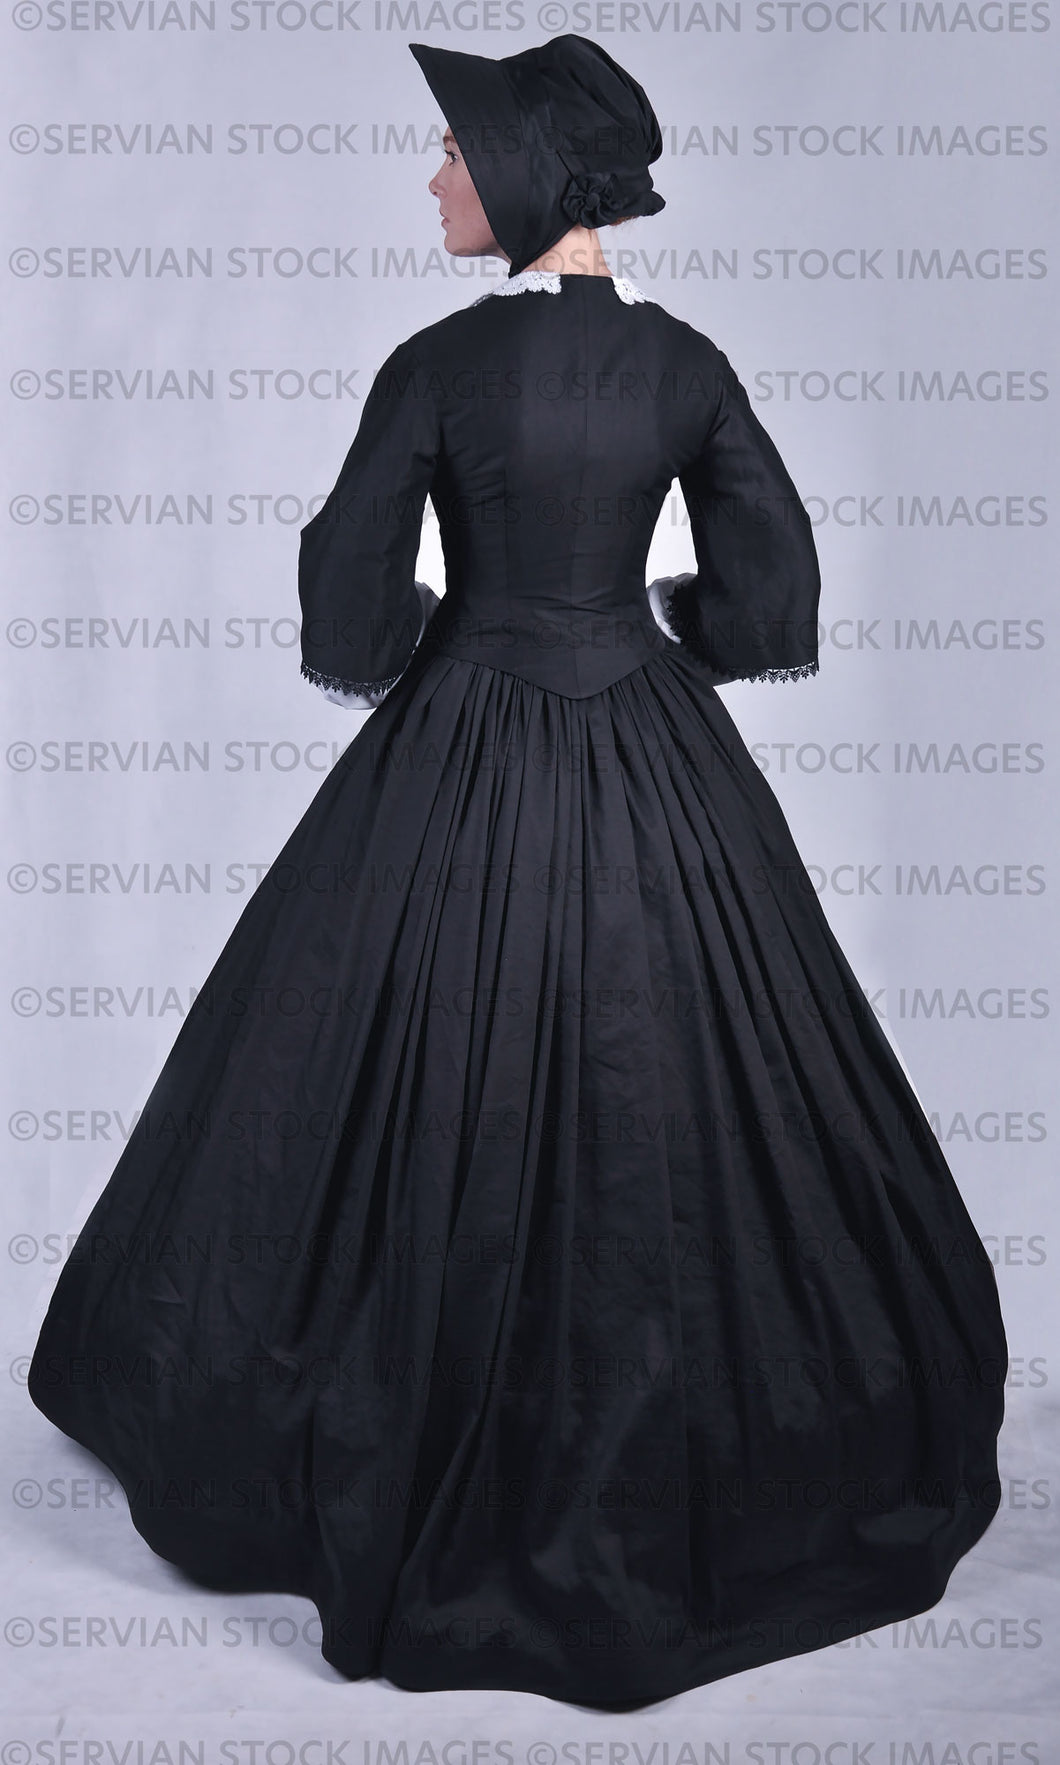 Victorian woman in a black ensemble with a lace collar  (Lauren 0795)